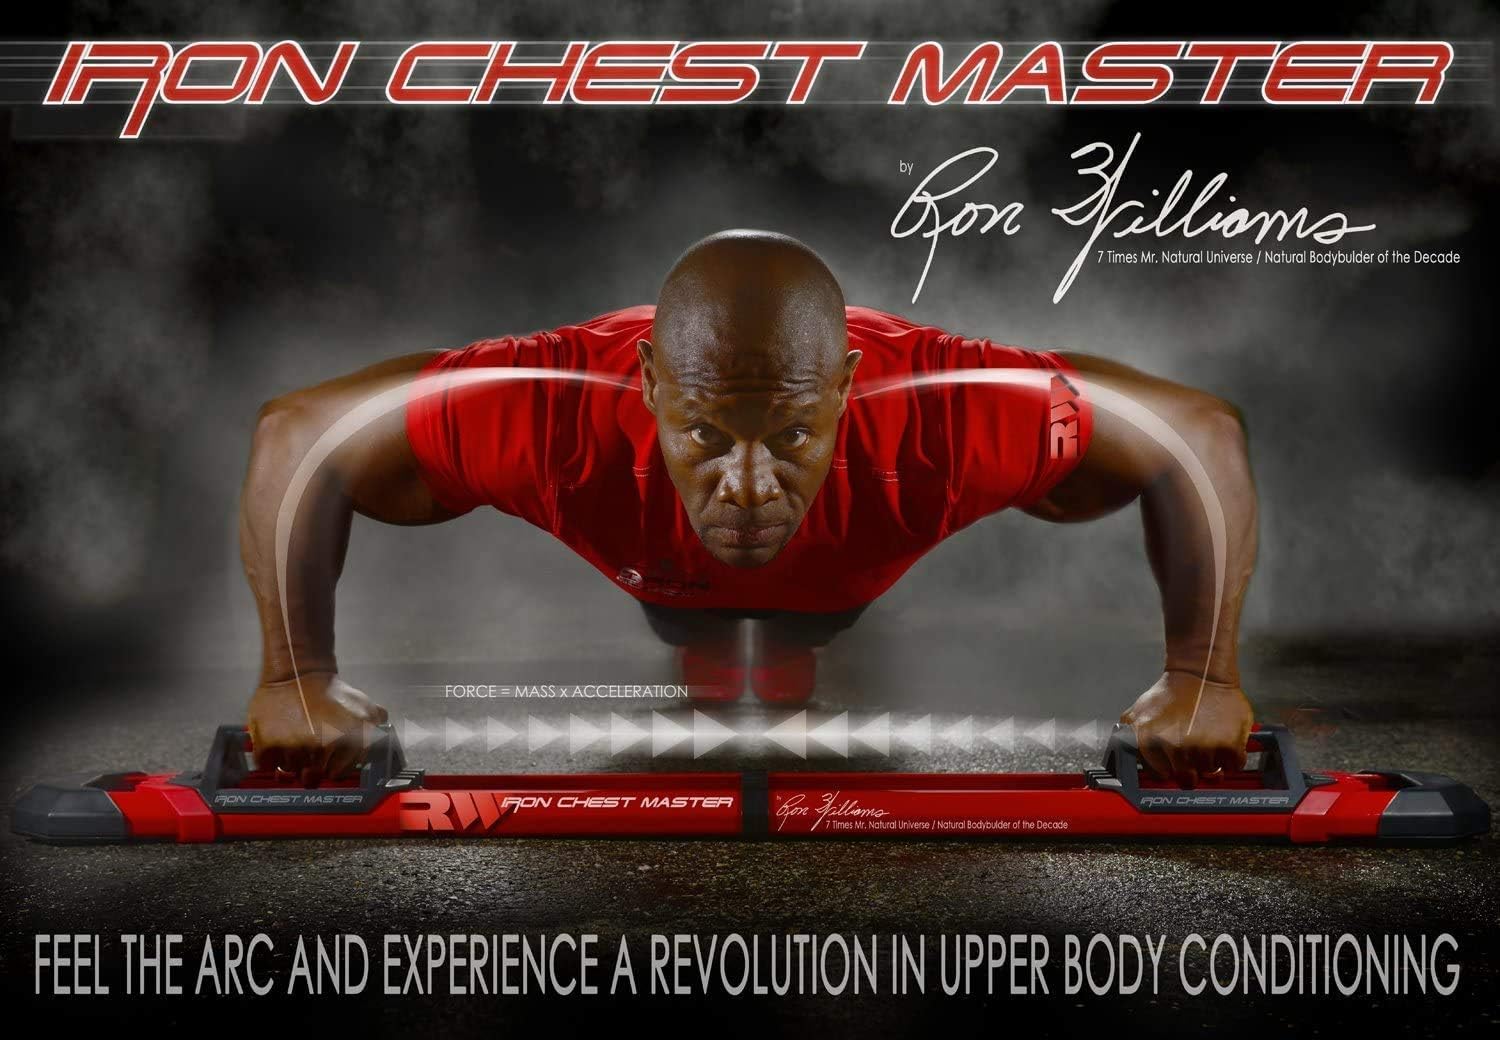 IRON CHEST MASTER Push Up Machine | At Home Fitness Equipment for Chest Workouts | Push Up Board Includes Resistance Bands and Unique Fitness Program